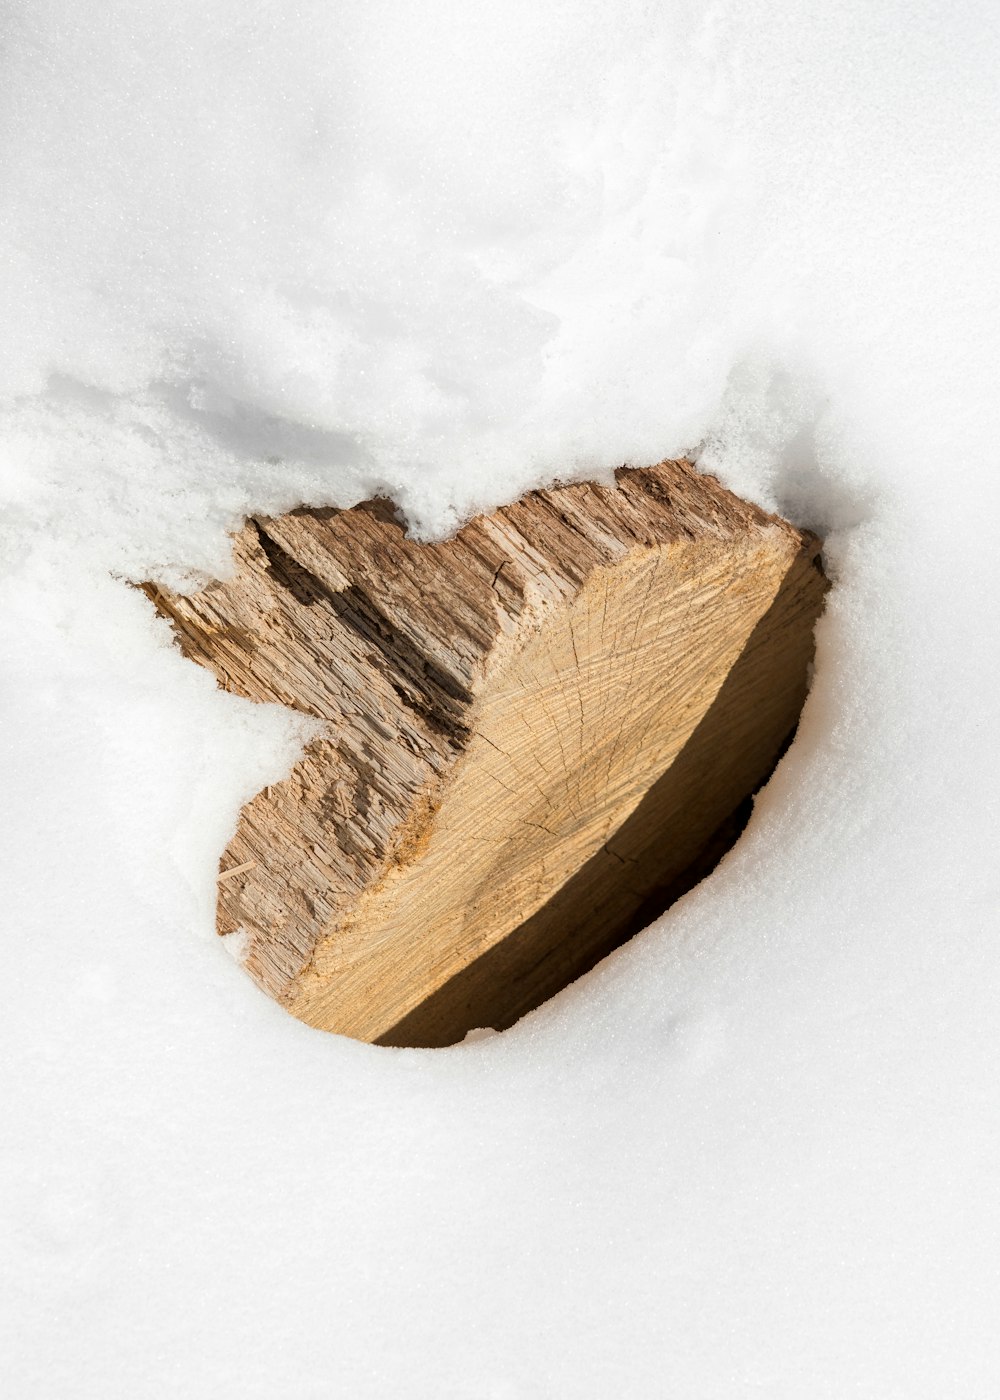 brown wooden log on white snow